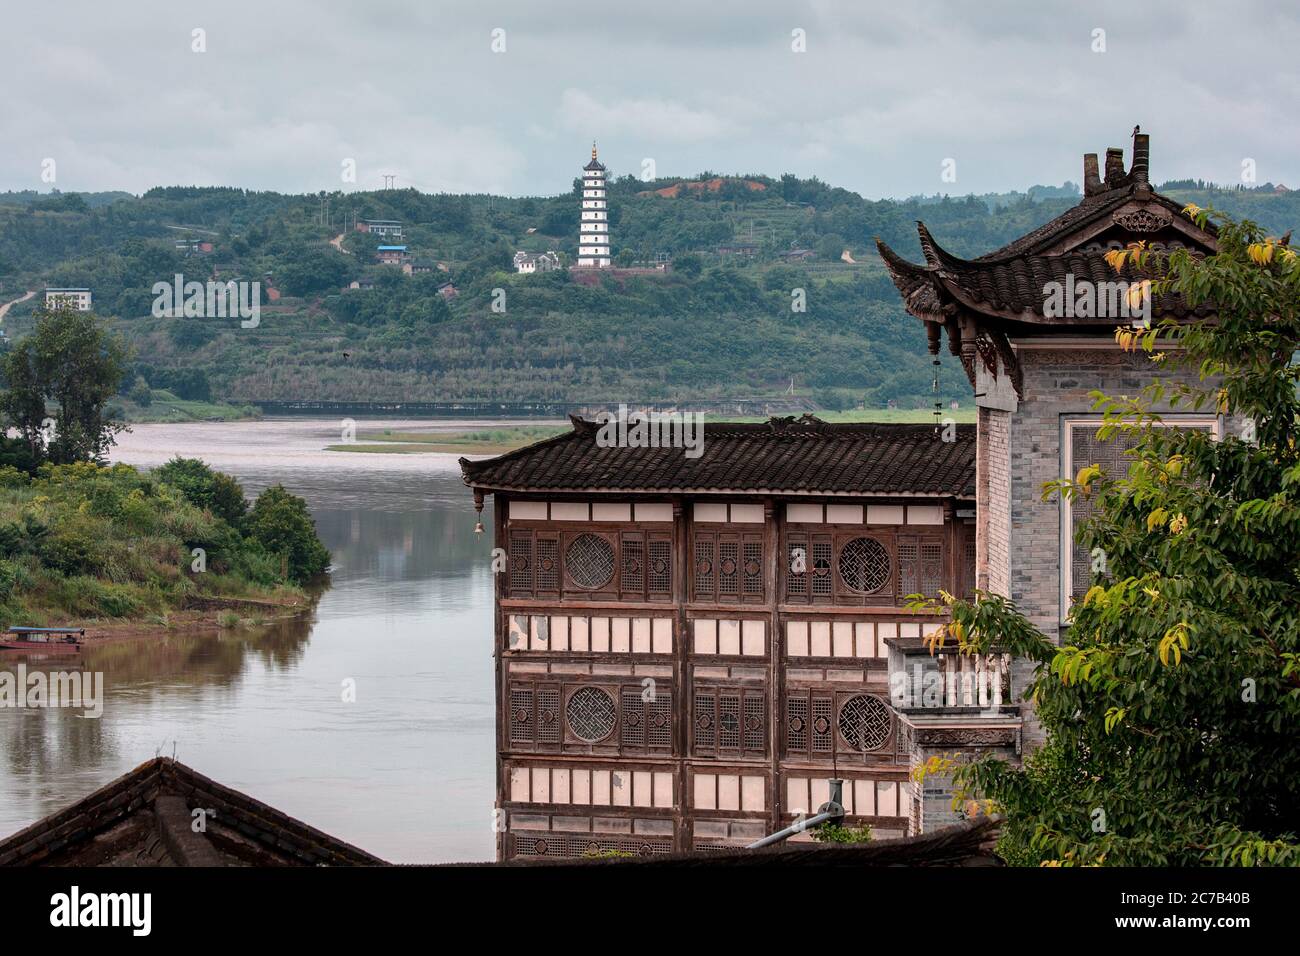 Chongqing, Chongqing, China. 16th July, 2020. SichuanÃ¯Â¼Å'CHINA-On July 13, 2020, The ancient town of Anju in Tongliang, Chongqing, one of the four ancient cities in China, is a place of nostalgia. It is a thousand-year-old city with ''long cultural deposits, rich cultural relics and historic sites, and beautiful natural scenery''. It is known as a place where ''mountains can be seen, water can be seen and nostalgia can be remembered''.As one of the four ancient cities of China, langzhong City and Lijiang city, Anju Town has numerous scenic spots. Besides the famous eight scenes of anju, th Stock Photo